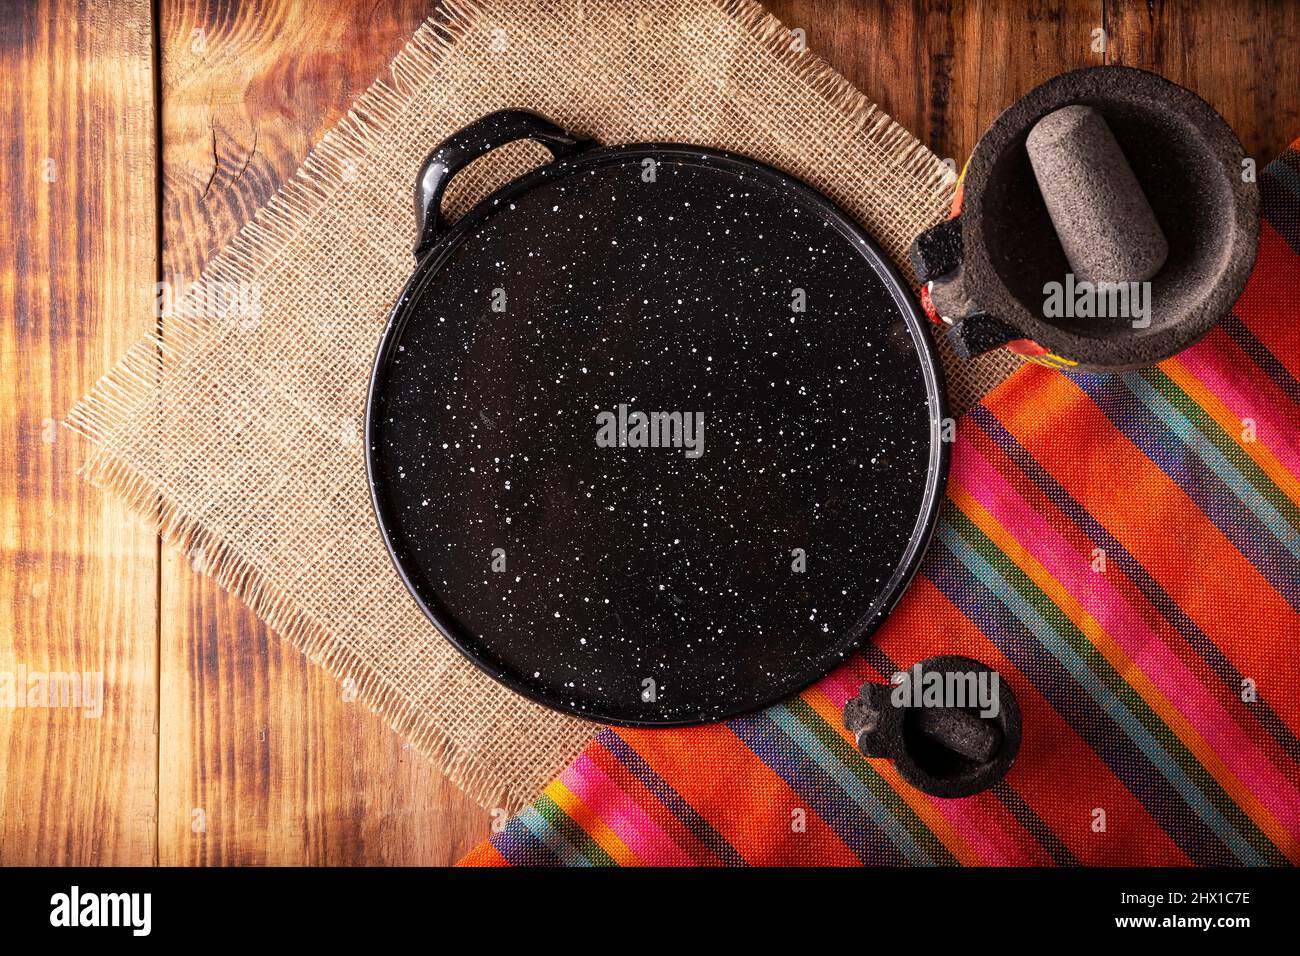 https://c8.alamy.com/comp/2HX1C7E/mexican-kitchen-utensils-colorful-traditional-fabric-comal-de-peltre-and-molcajete-on-wooden-rustic-table-top-view-with-copy-space-2HX1C7E.jpg